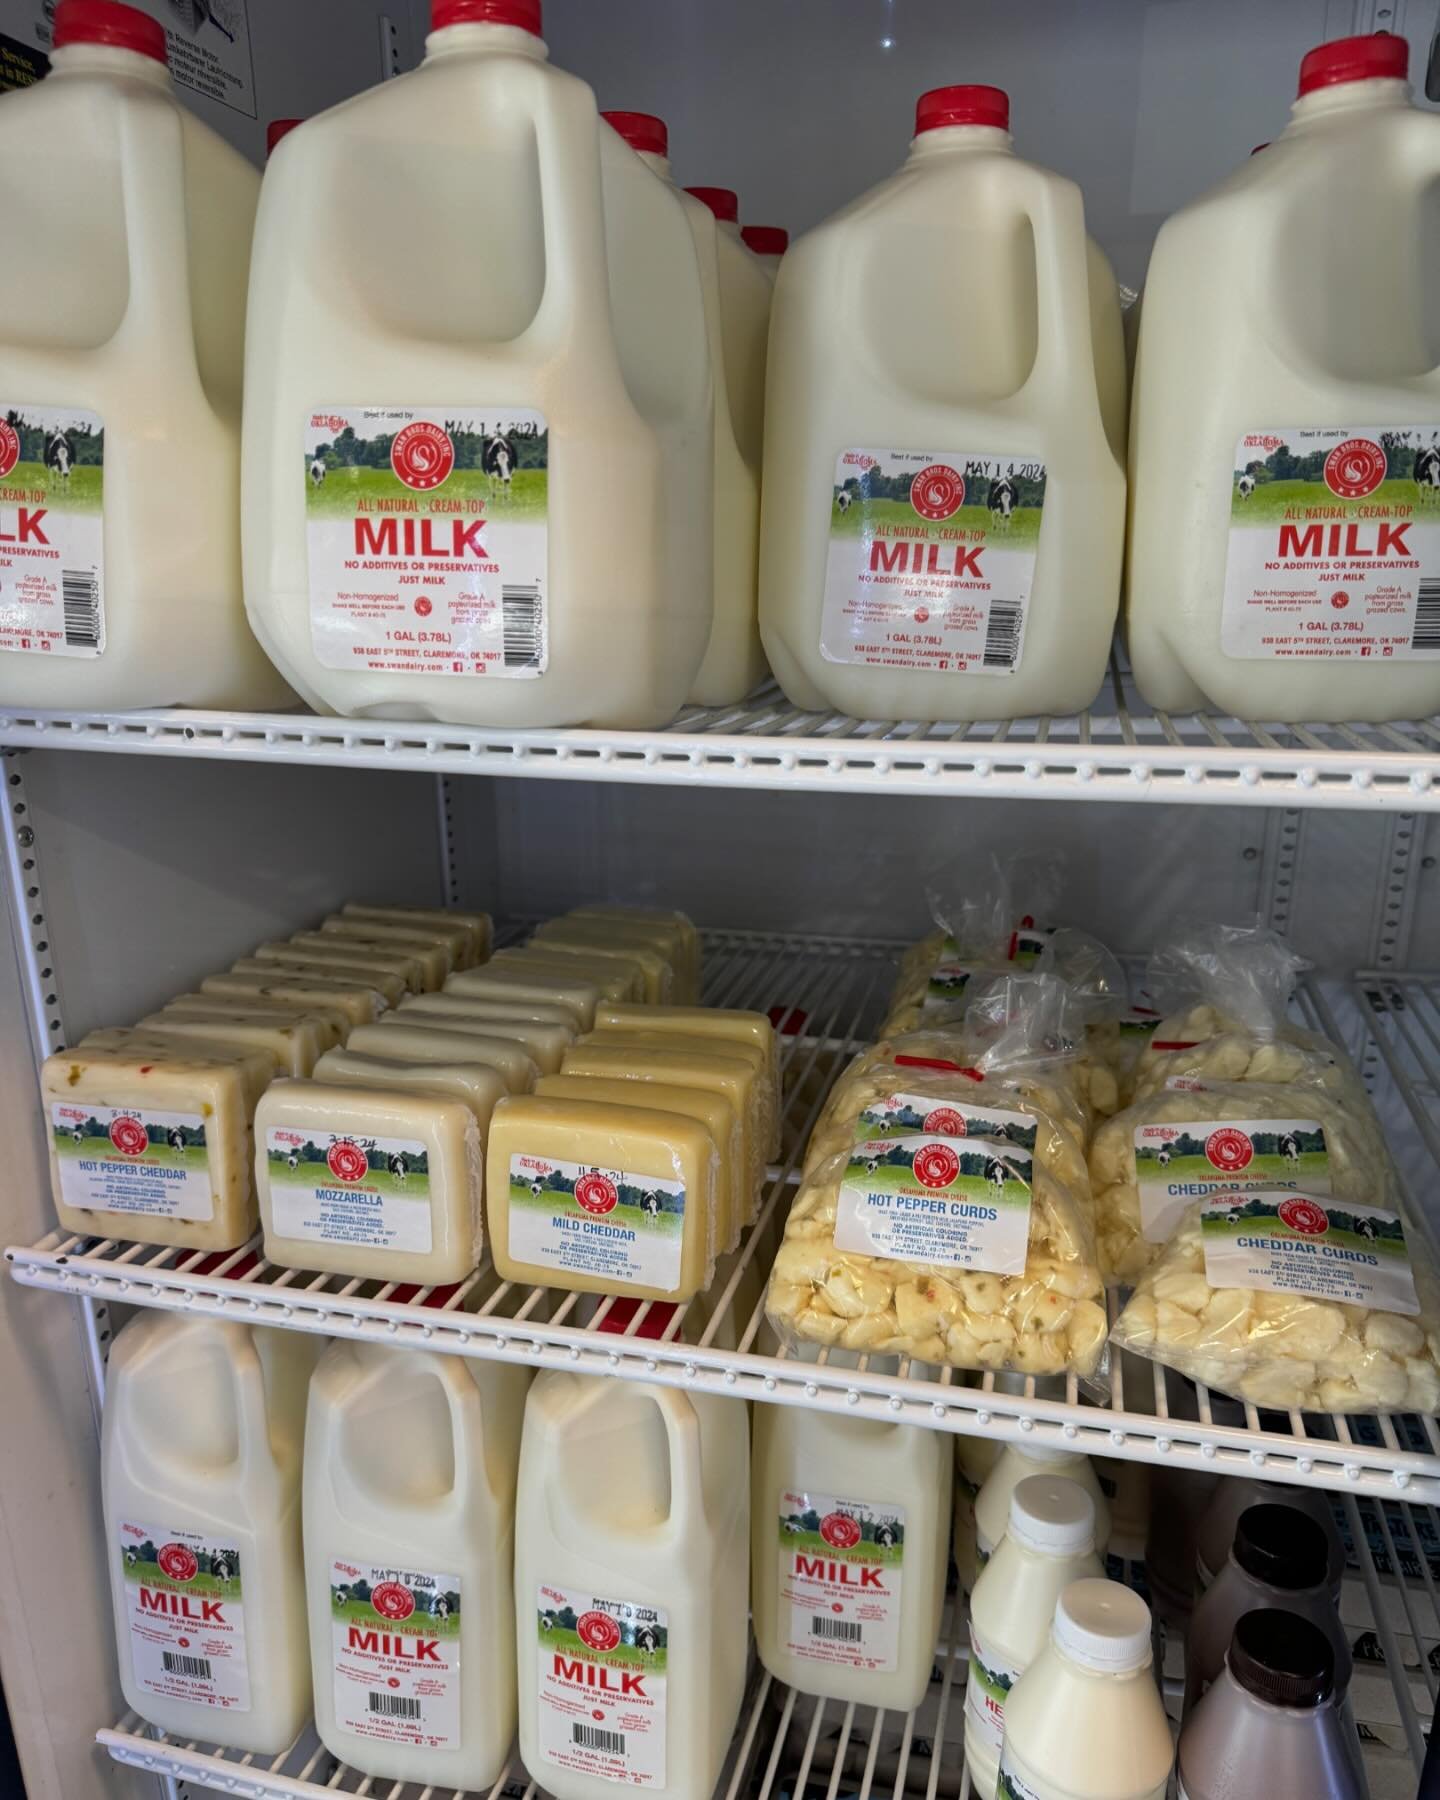 Monday means local dairy delivery! Swan Bros Dairy from Claremore provides Bōn with low pasteurized, non homogenized milk, cream, chocolate milk, and cheeses. If you&rsquo;re used to store bought dairy, one taste and you&rsquo;ll see that there&rsquo